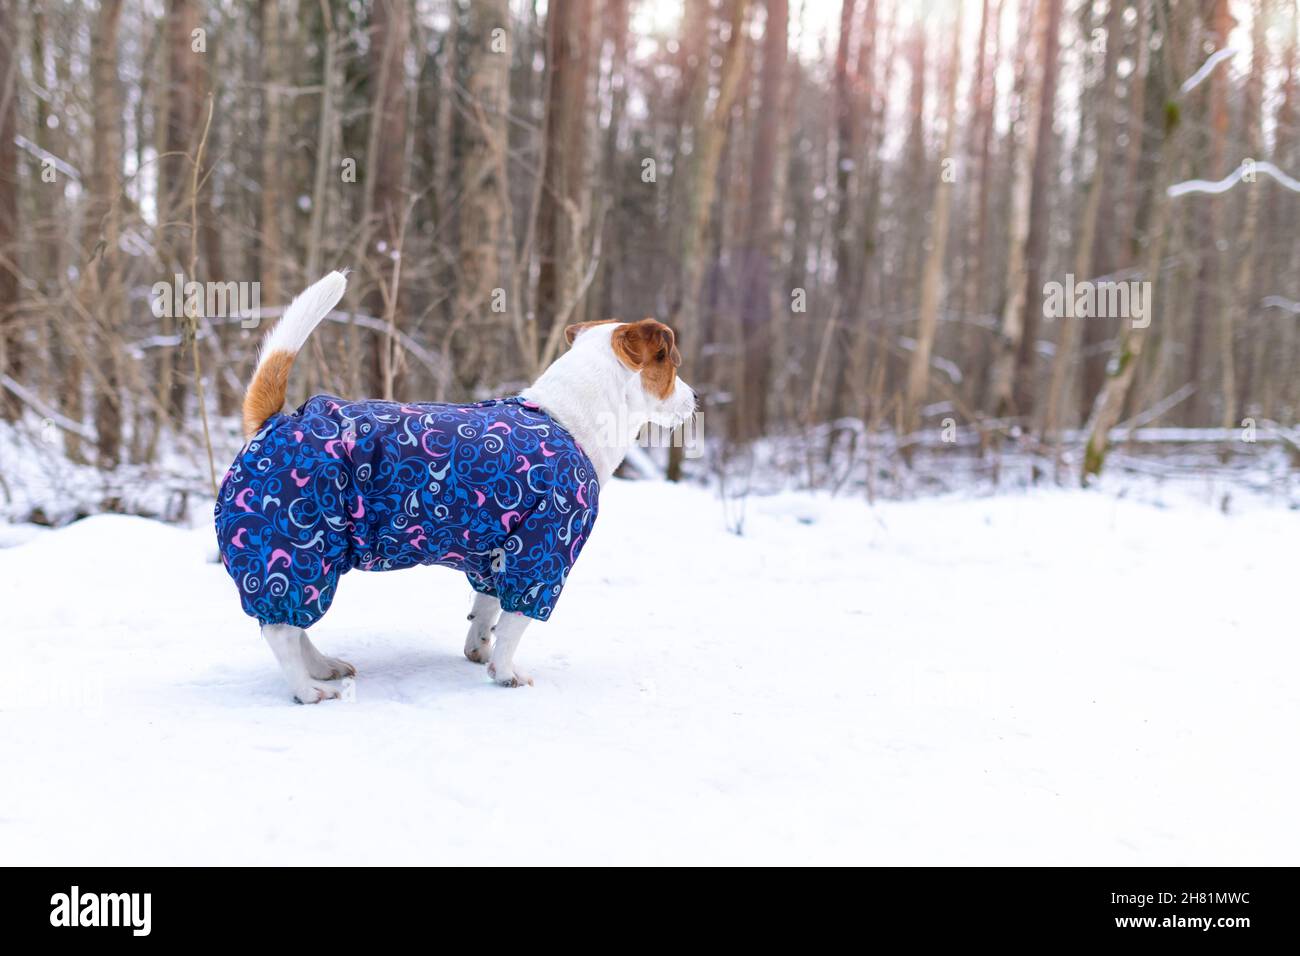 A little dog in blue jumpsuit standing sideways in a winter snowy forest. Jack Russell Terrier with tail raised, looking into the distance. Protect Stock Photo